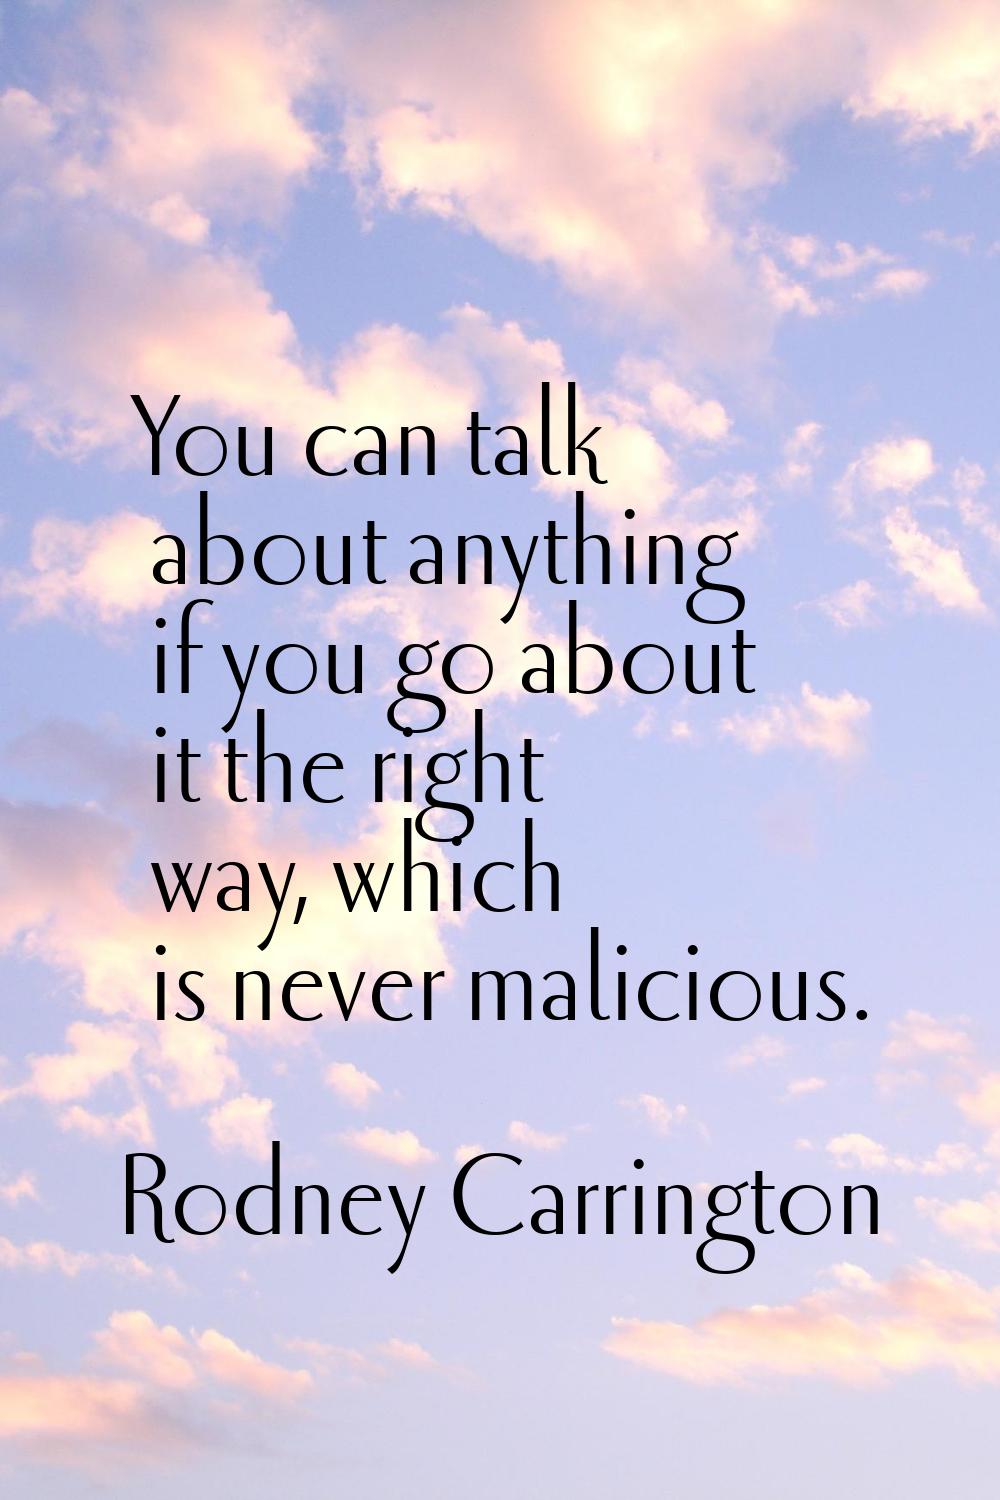 You can talk about anything if you go about it the right way, which is never malicious.